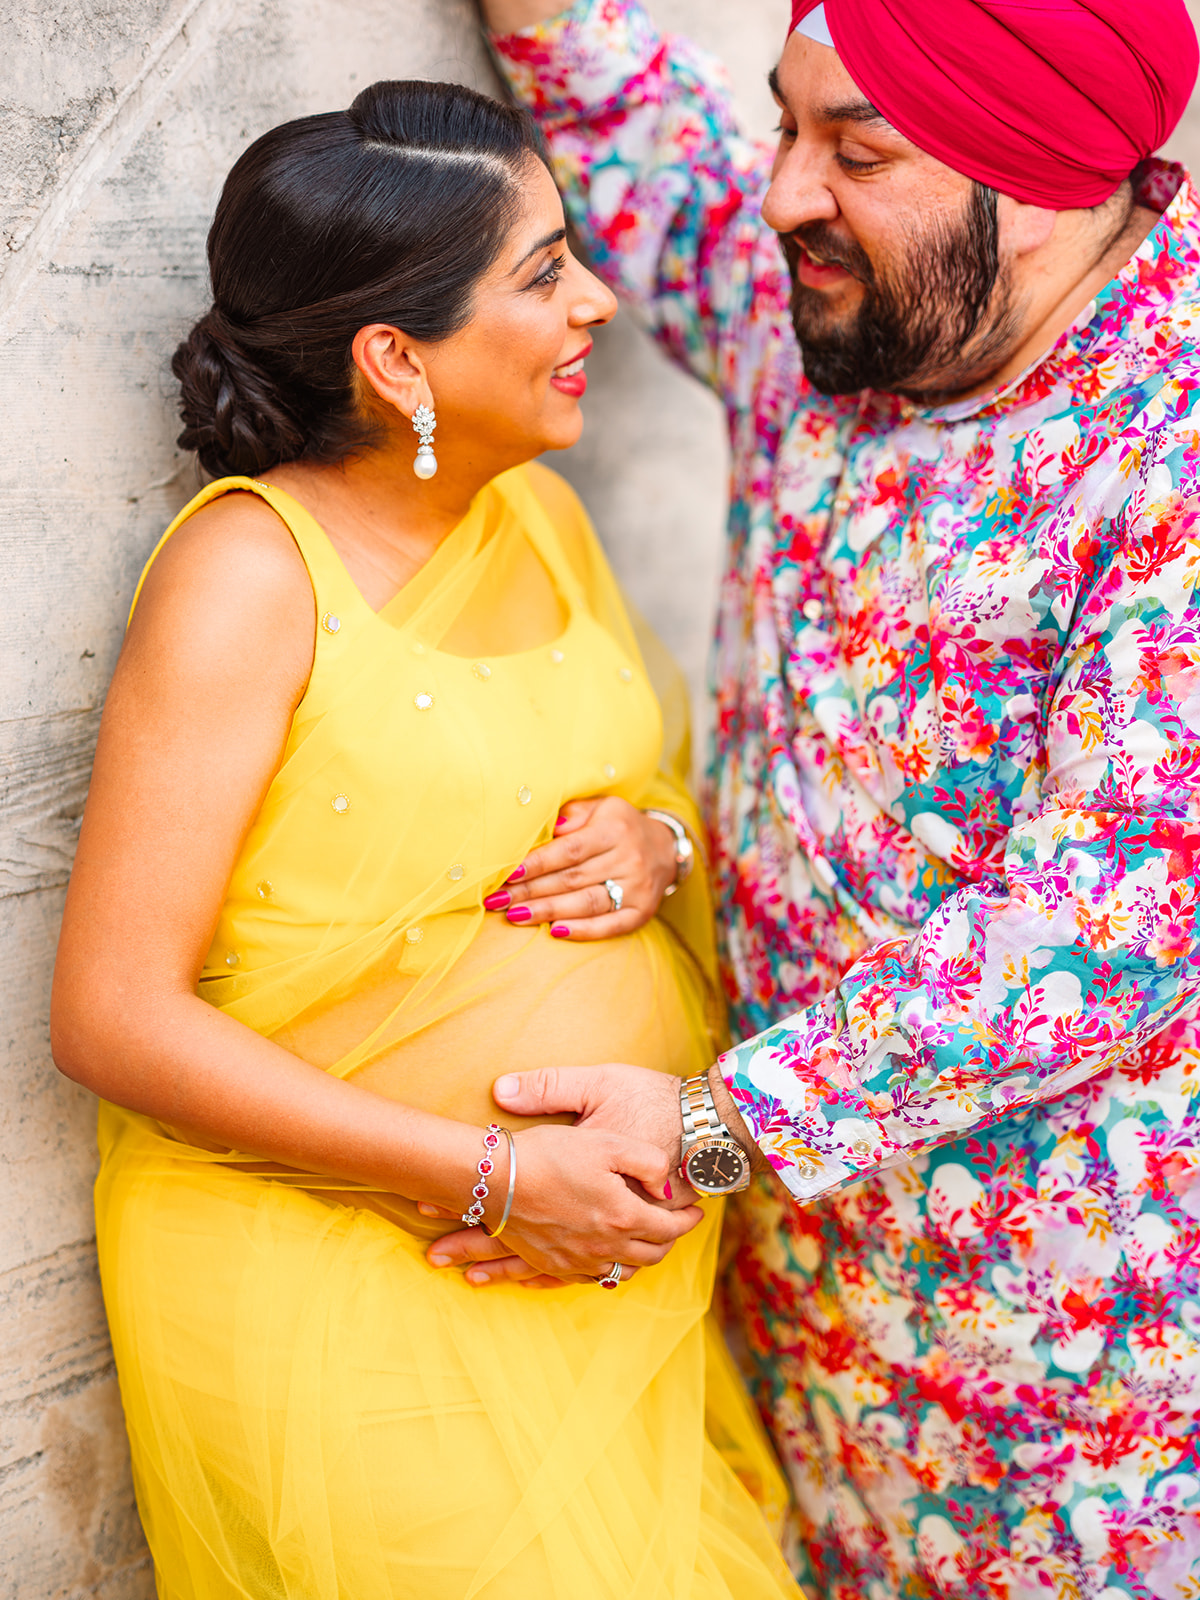 fort desoto maternity session very vivid modern Indian clothes that reflect personalities brightness of St pete beach